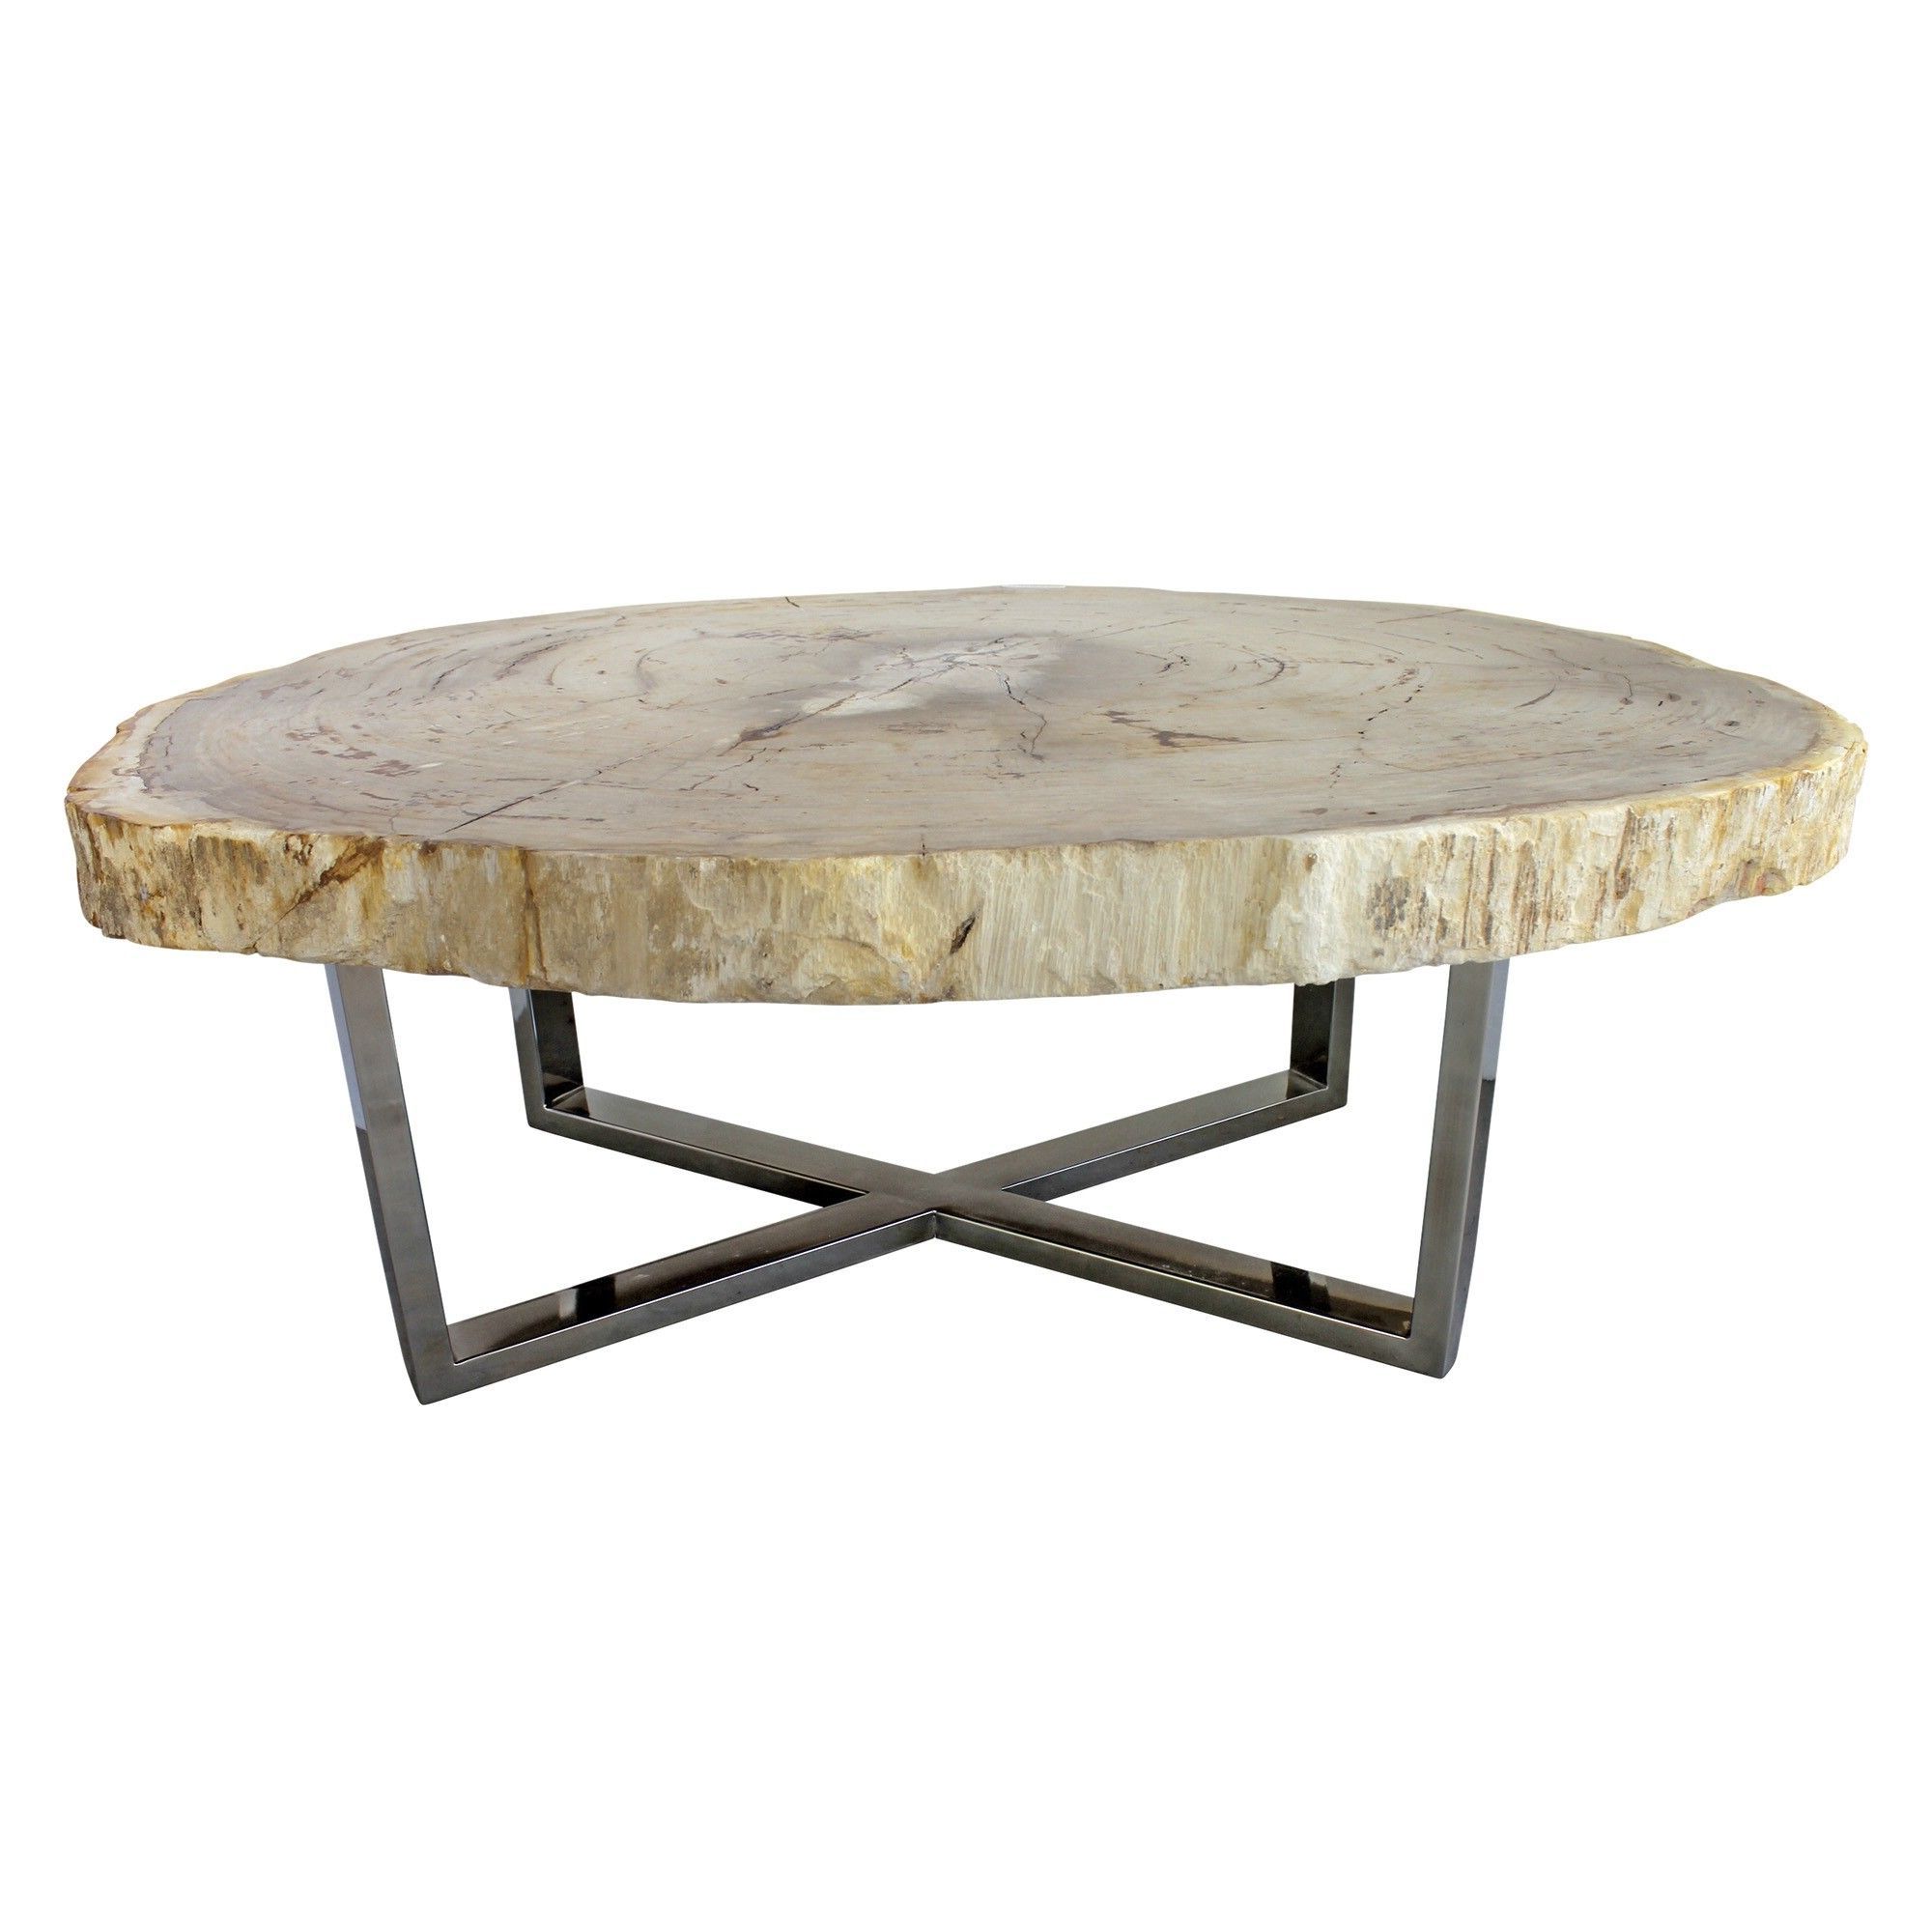 Best And Newest Light Natural Drum Coffee Tables With Regard To A Coffee Table Featuring A Solid, Light Natural Edge (Gallery 9 of 20)